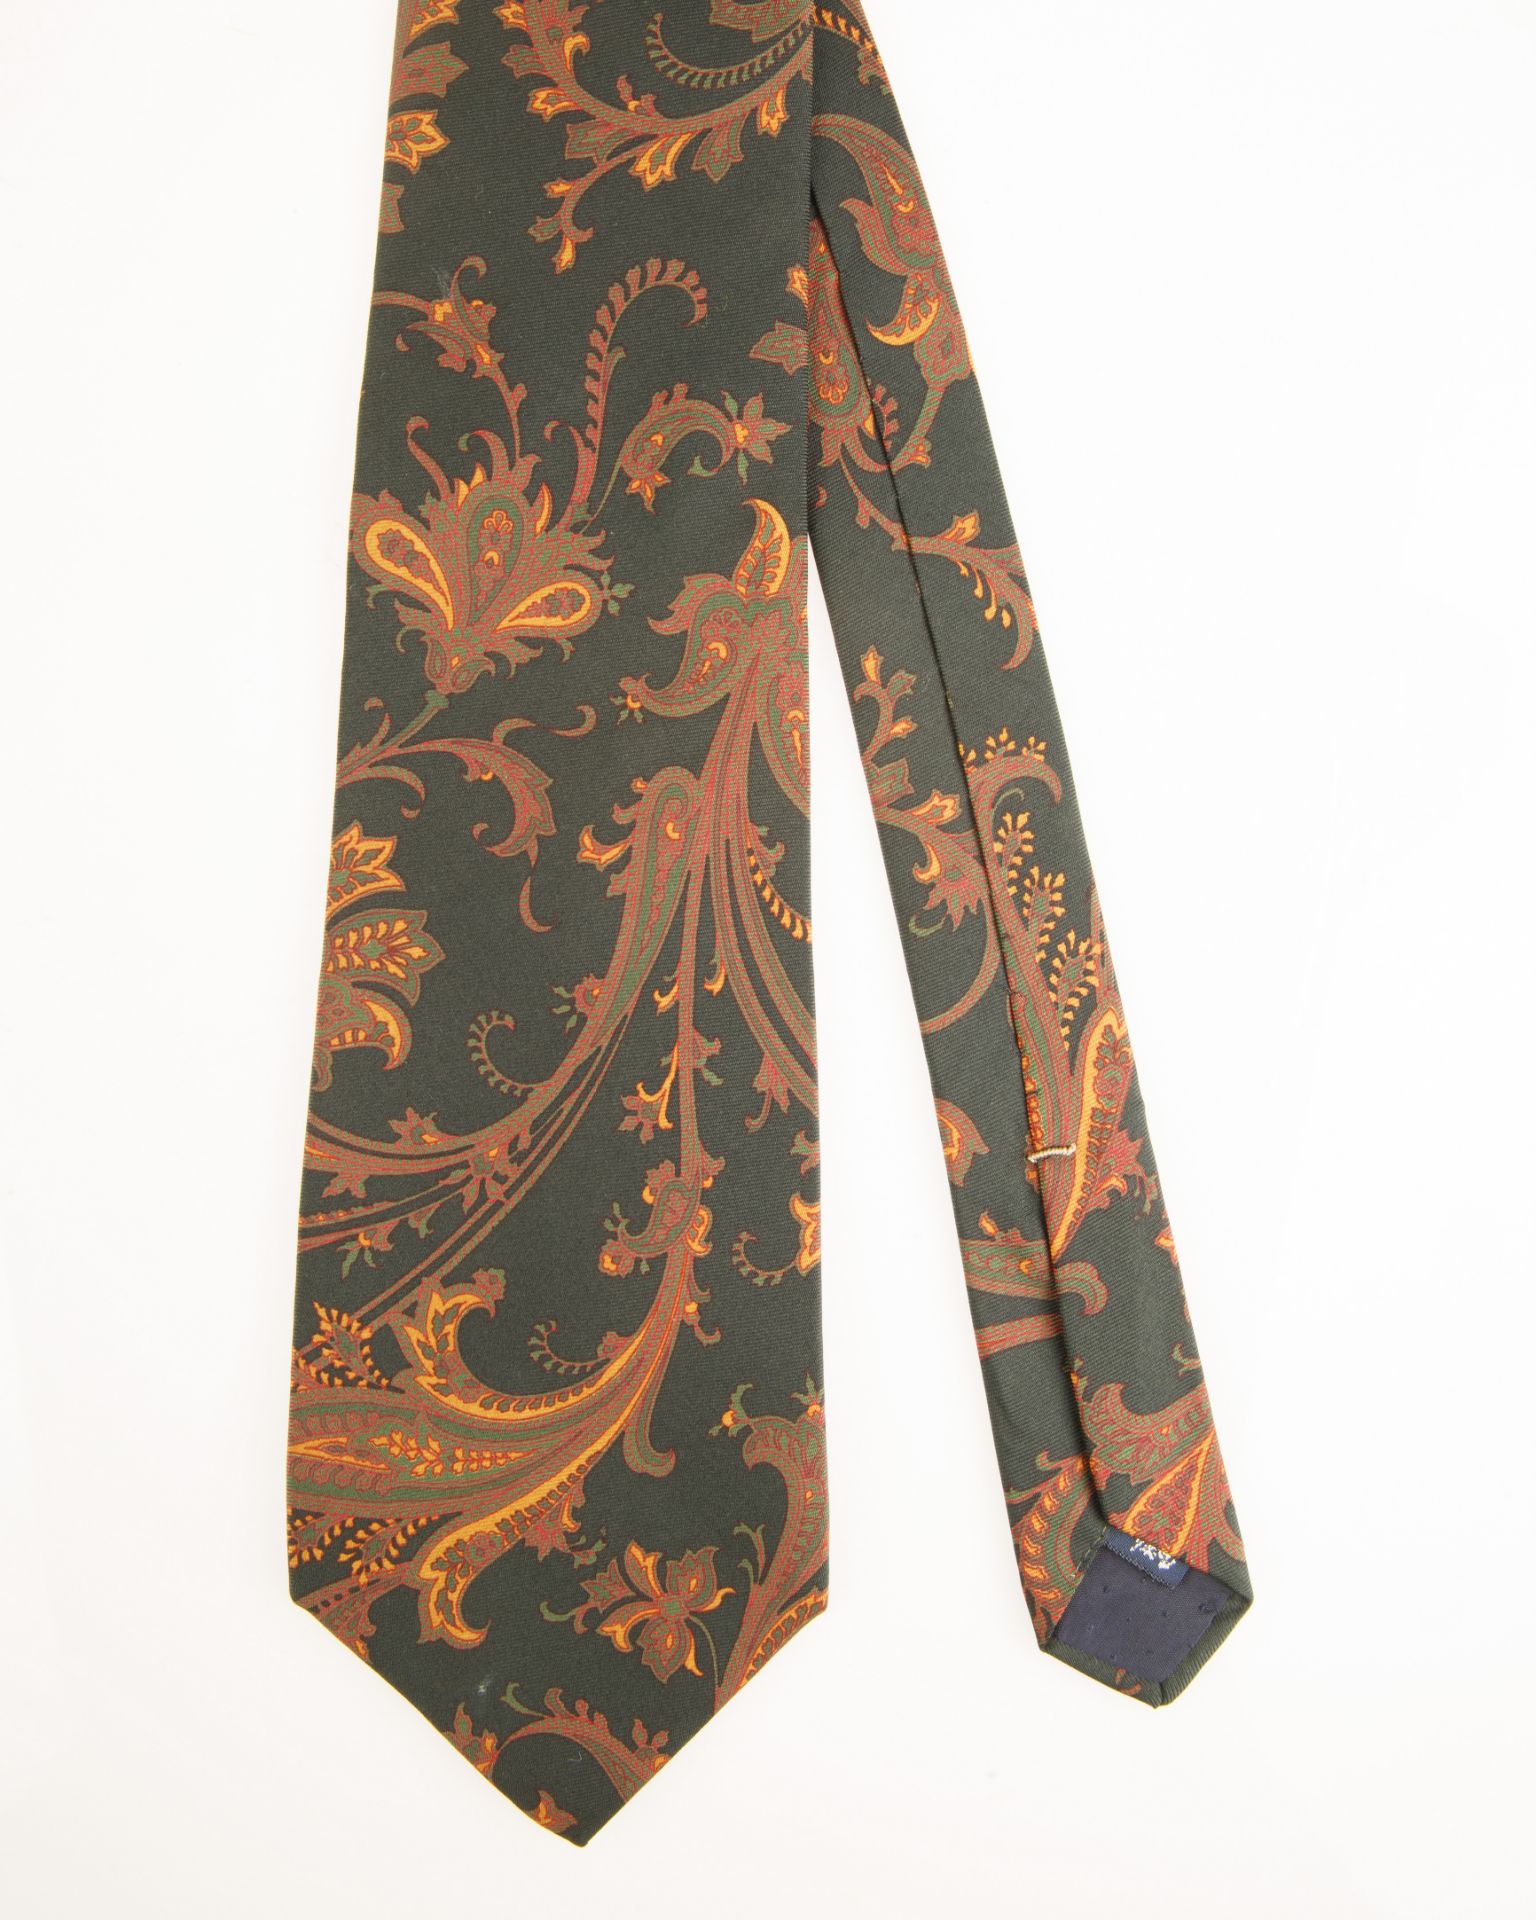 GROUP OF FIVE BURBERRY TIES - Image 4 of 11